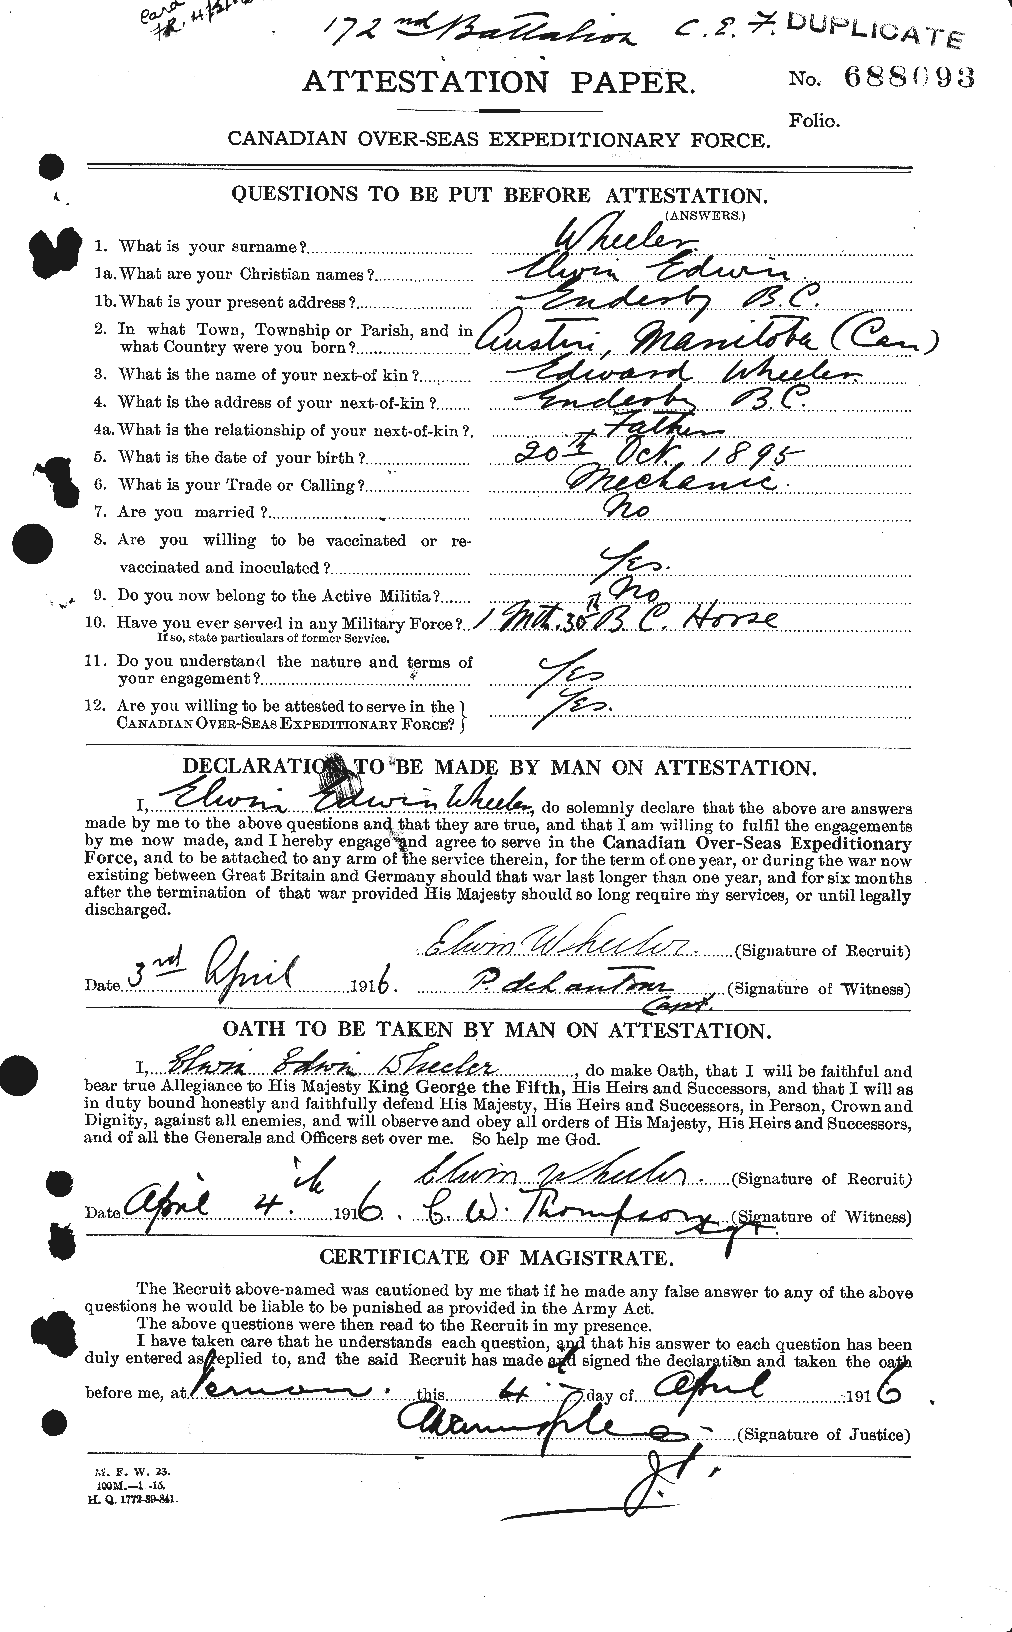 Personnel Records of the First World War - CEF 668562a